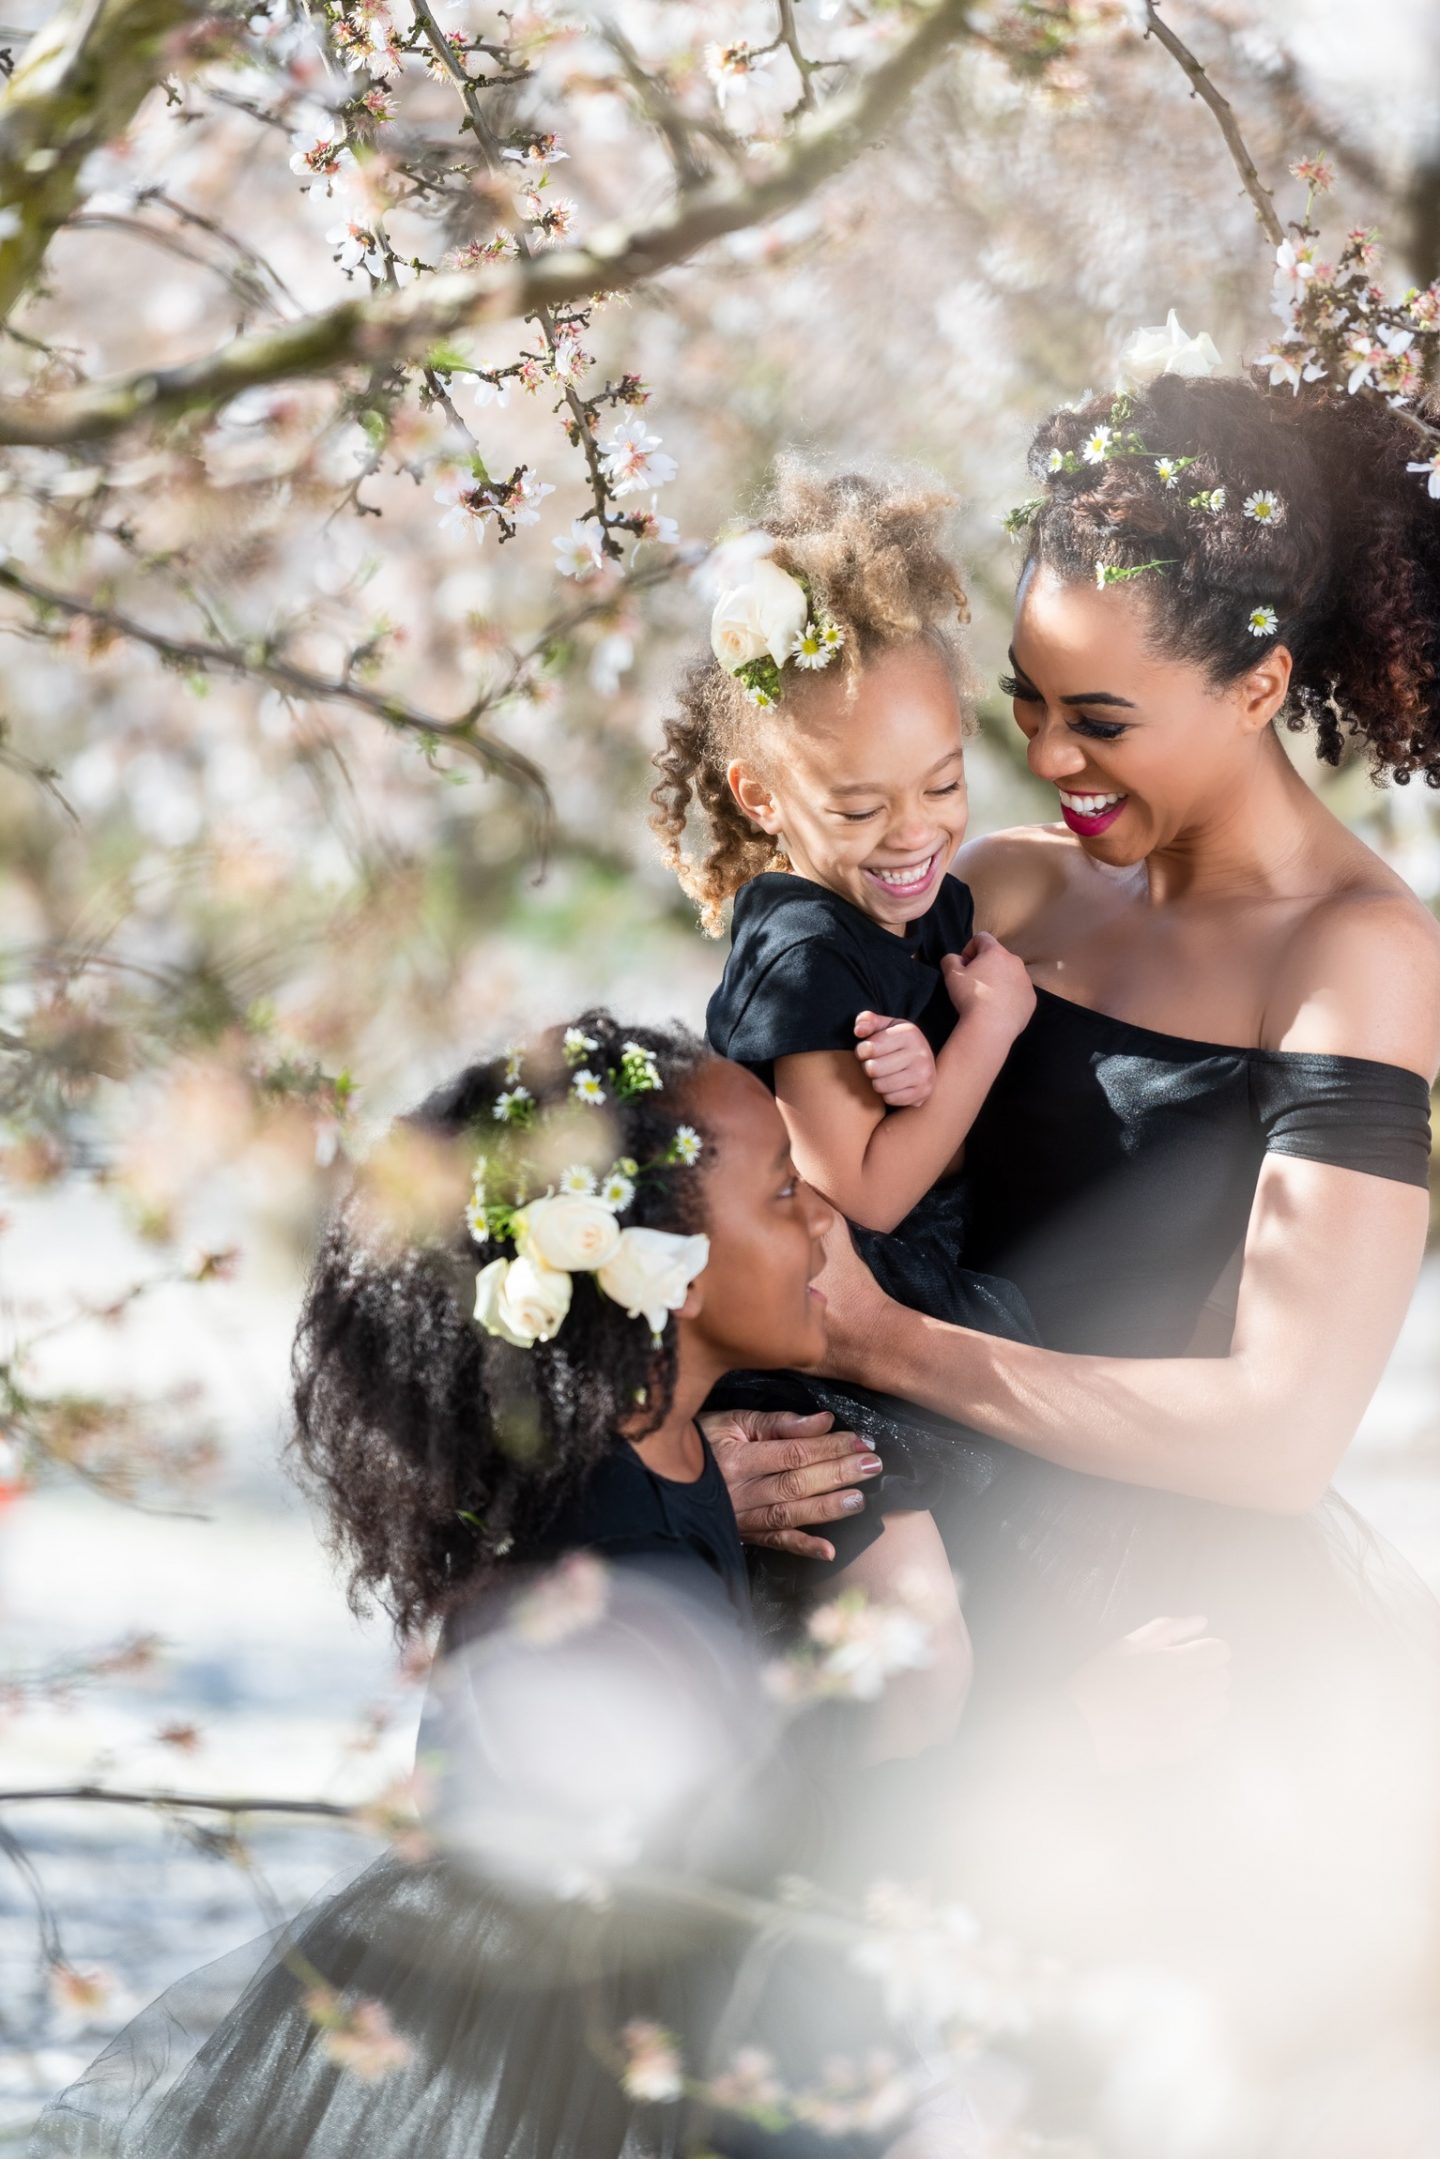 How I Teach My Daughters About What it Means to Be Beautiful